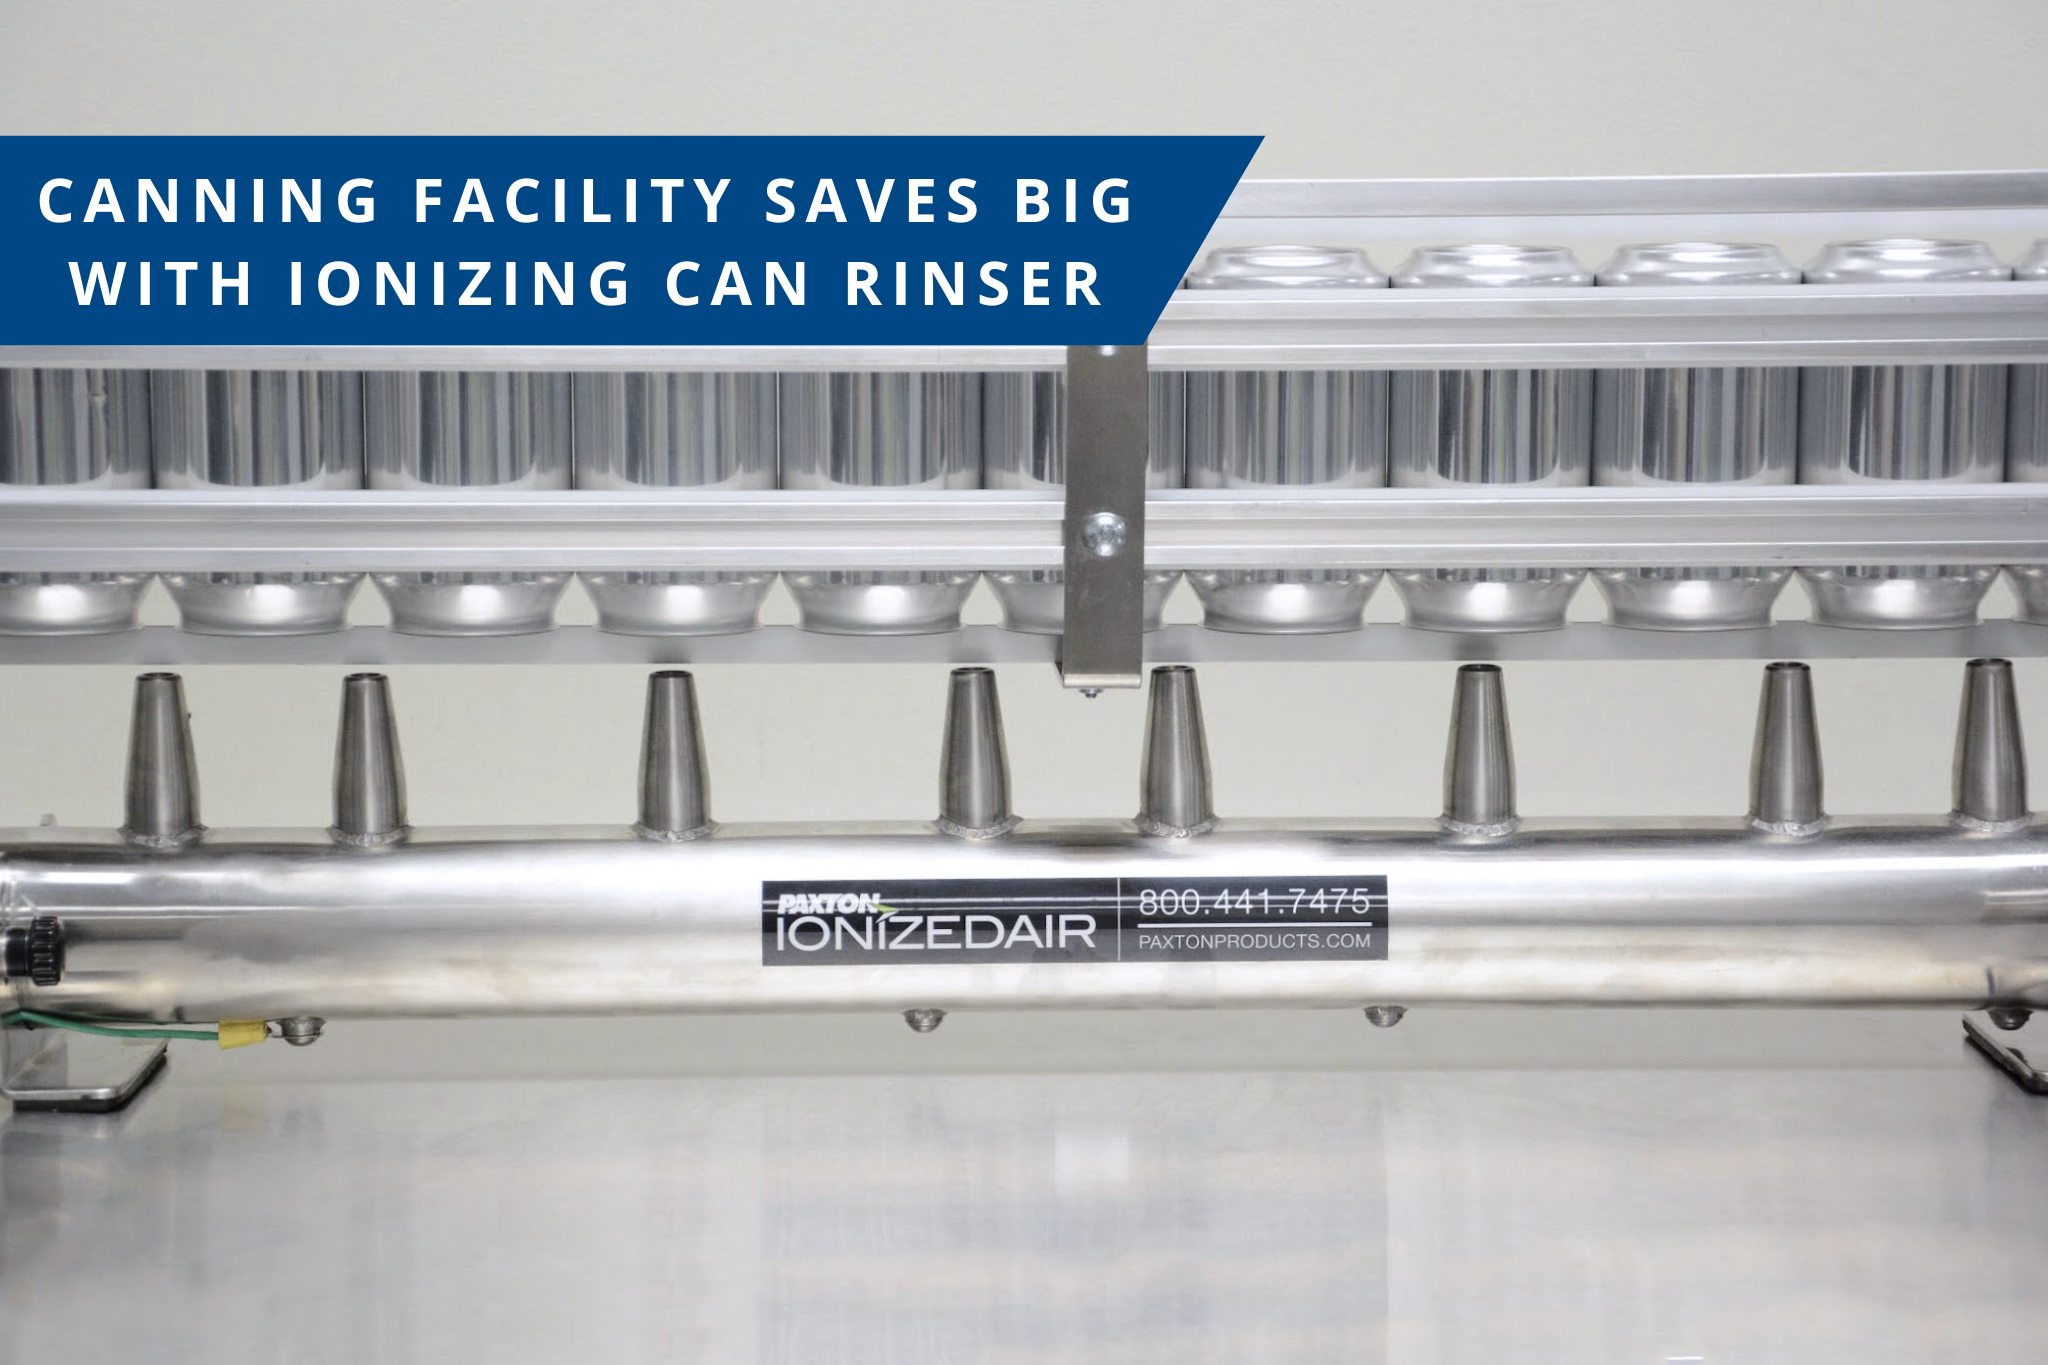 Canning Facility Saves Big with Ionizing Can Rinser